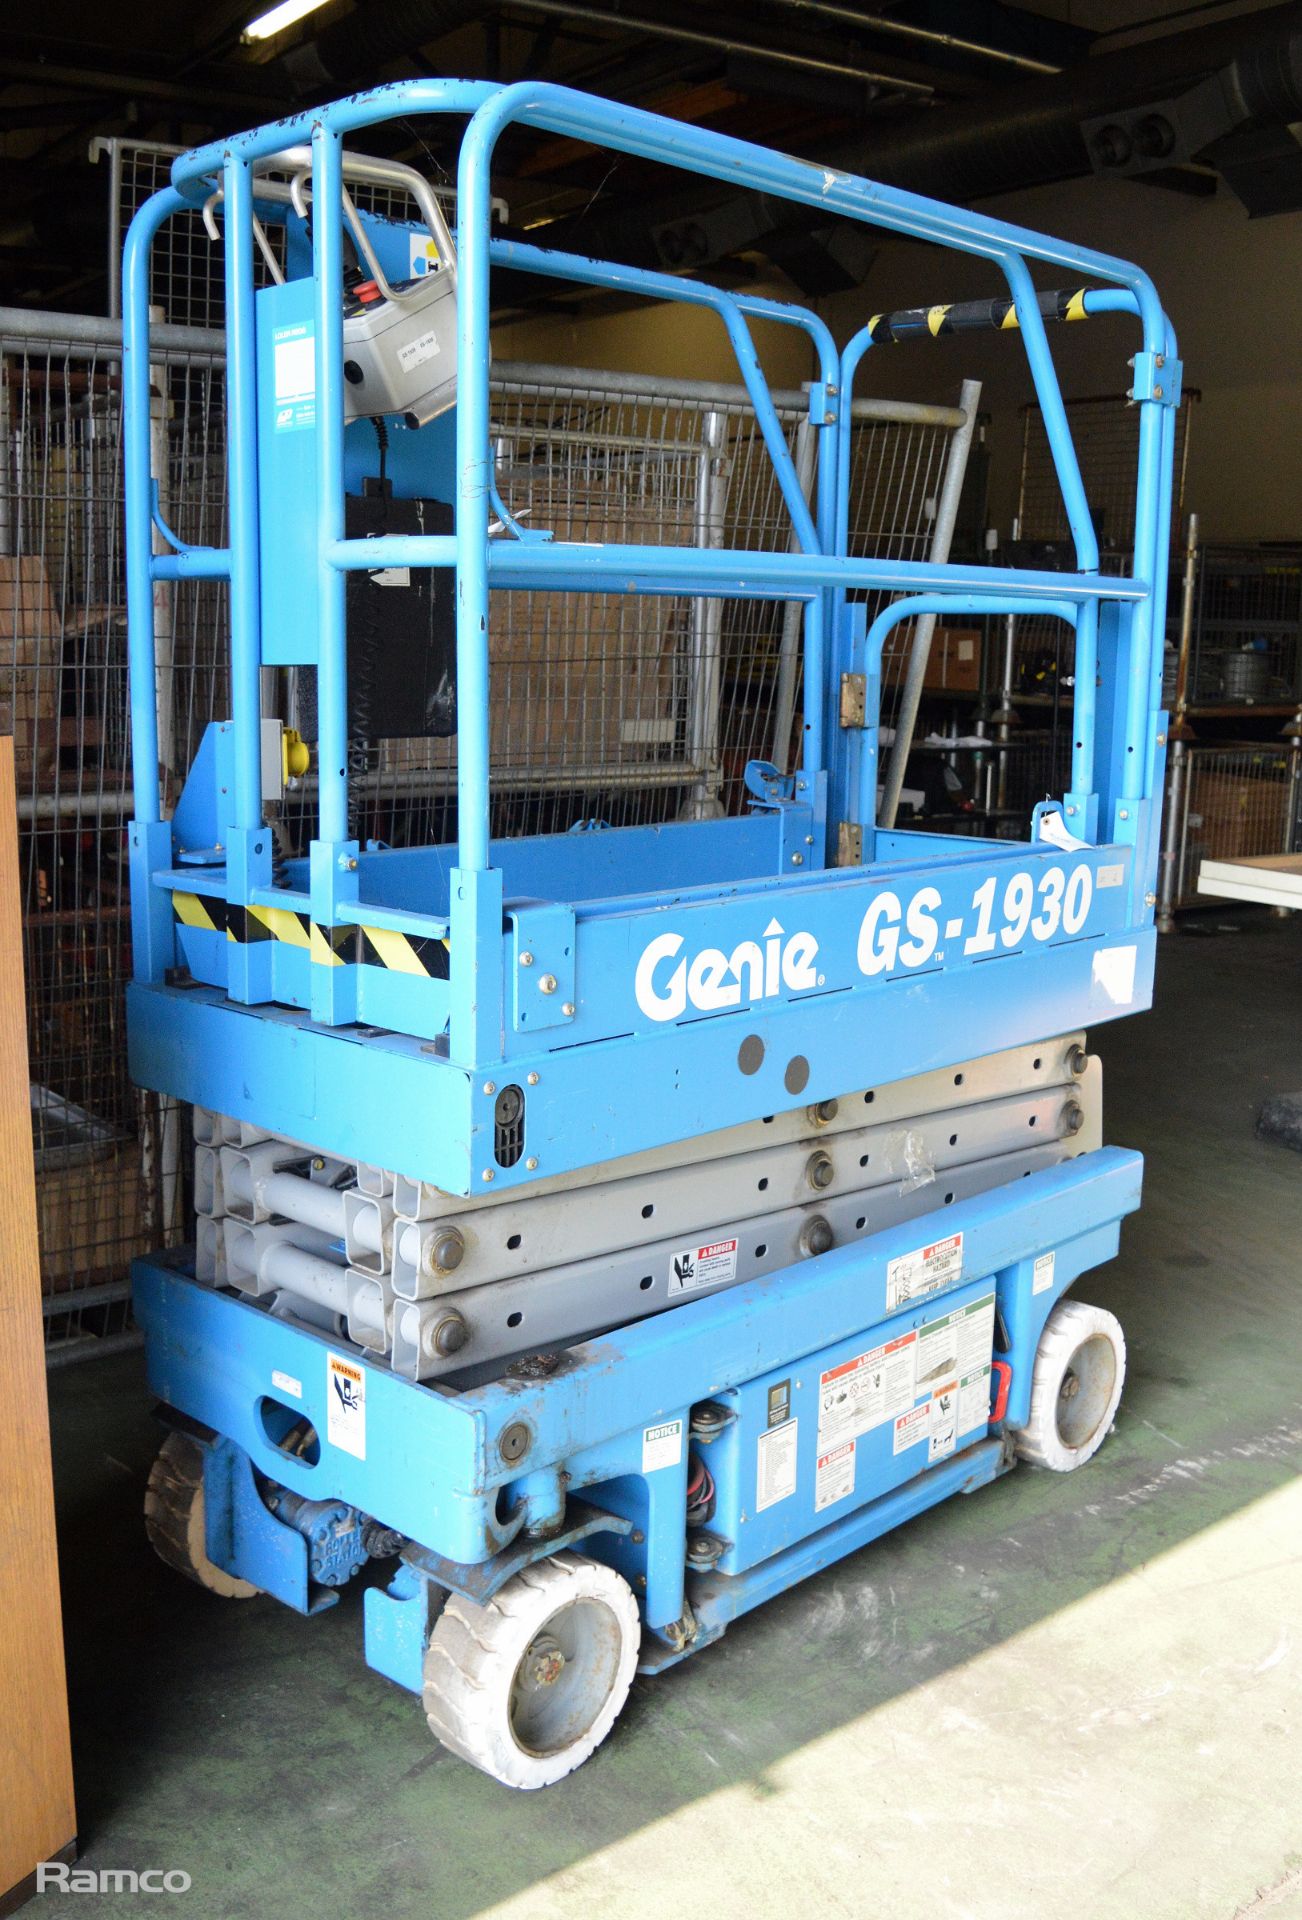 Genie Lift - GS-1930 - serial 20277 - Manufactured 08-19-99 - 100-250 VAC - 50/60hz - Max - Image 2 of 8